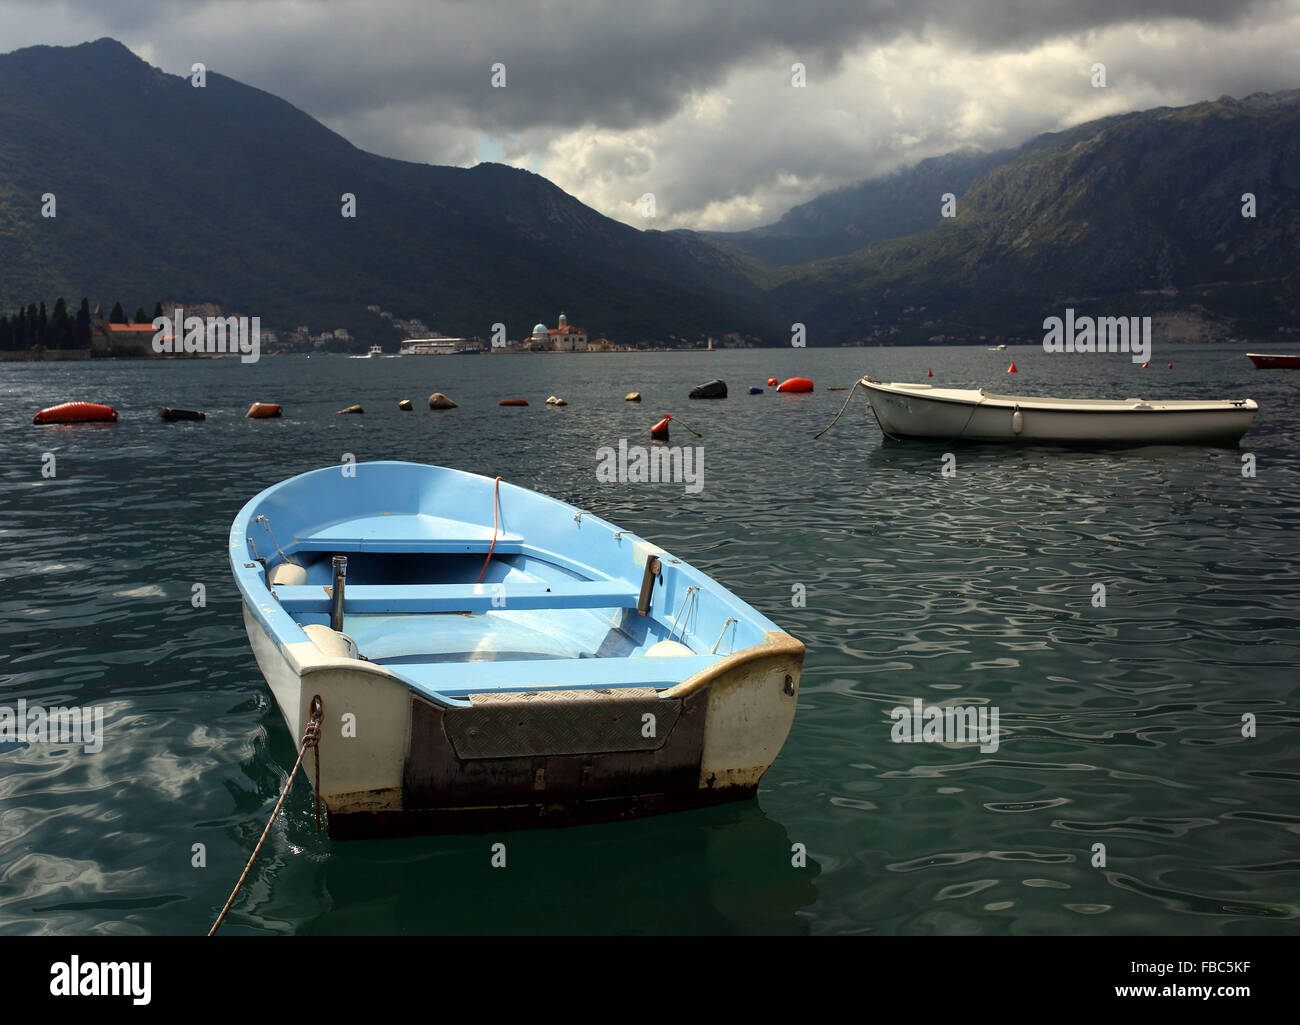 Dinghy boats are pictured moored in the Bay of Kotor in Montenegró near the old town of Perast. Stock Photo